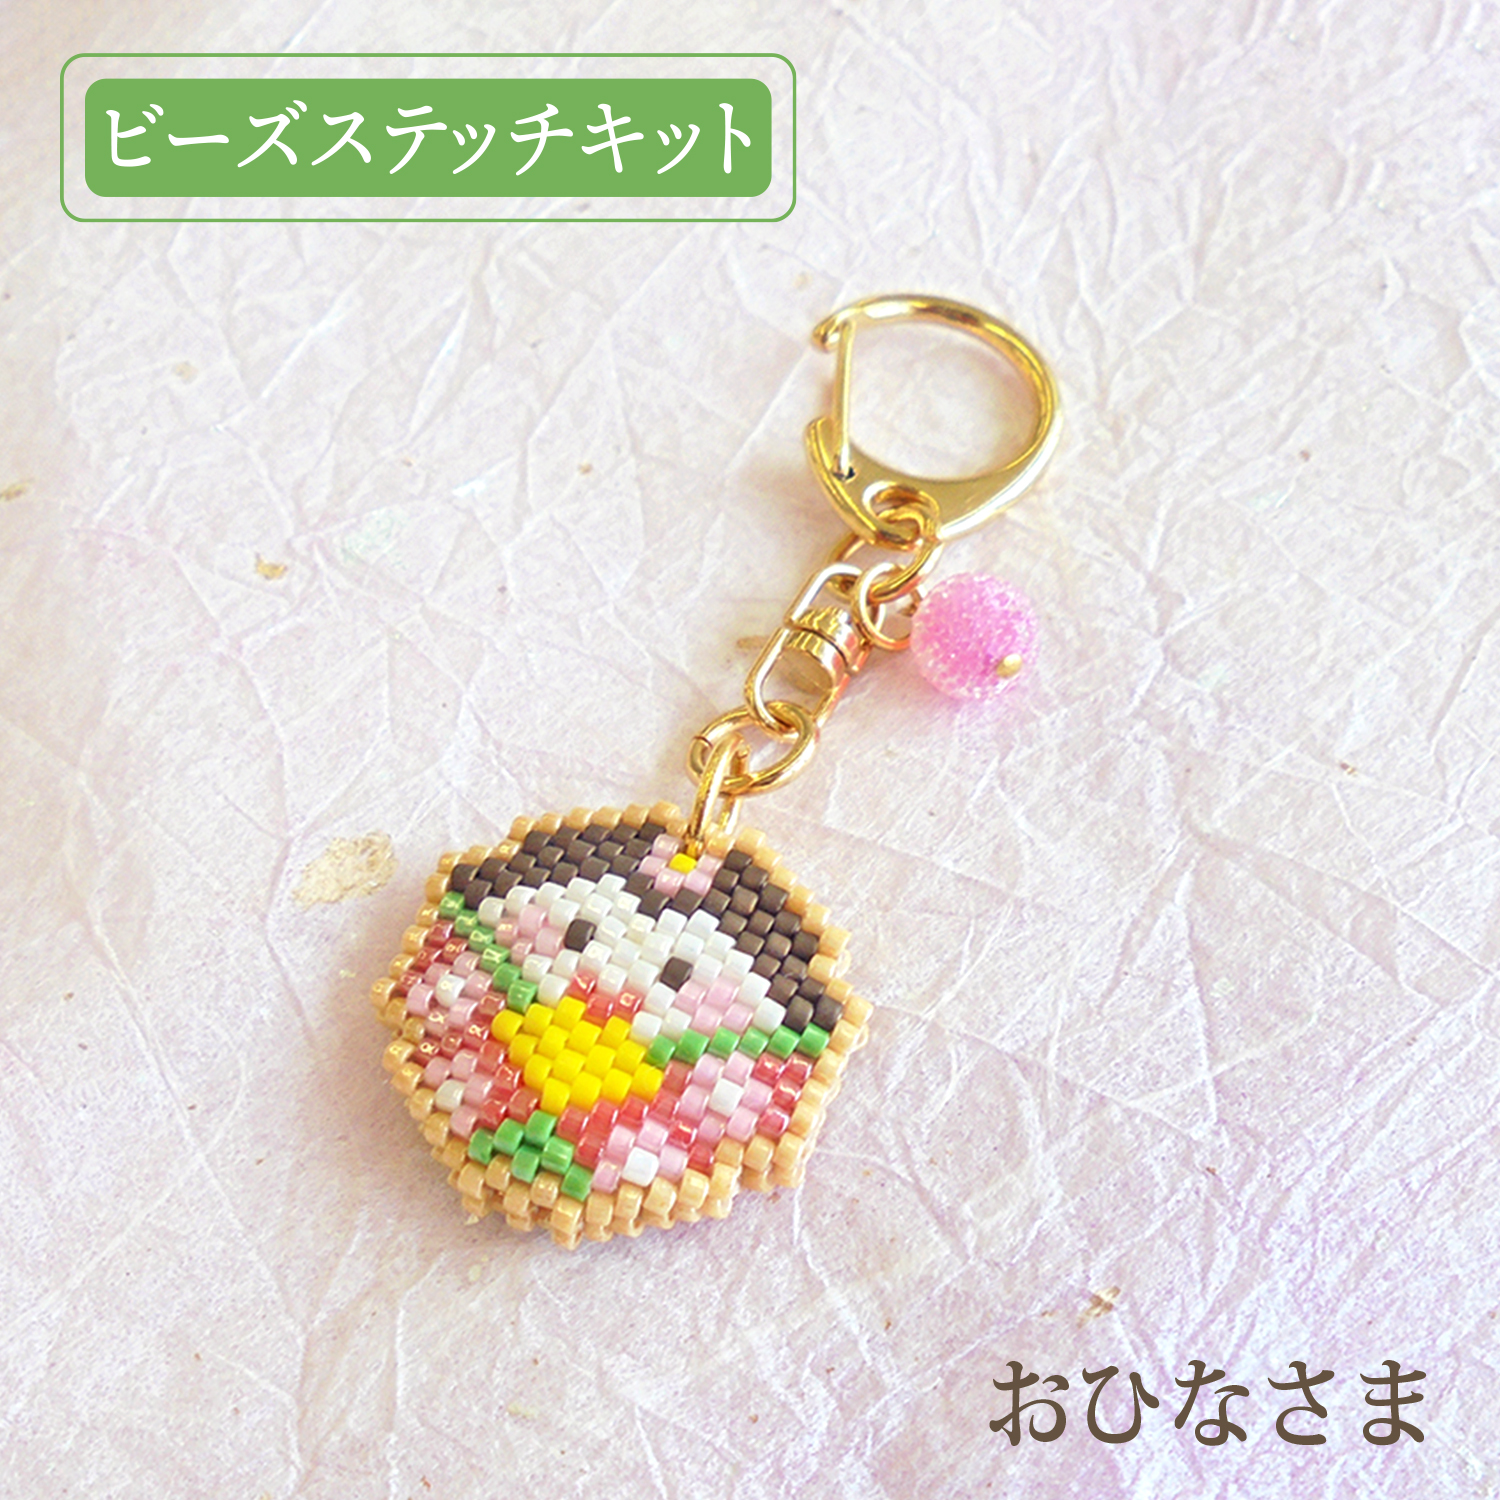 Order upon demand", not returnable]PB311 Beads Kit, Icing Cookie Style, Bead Stitch, 3bag set (set)